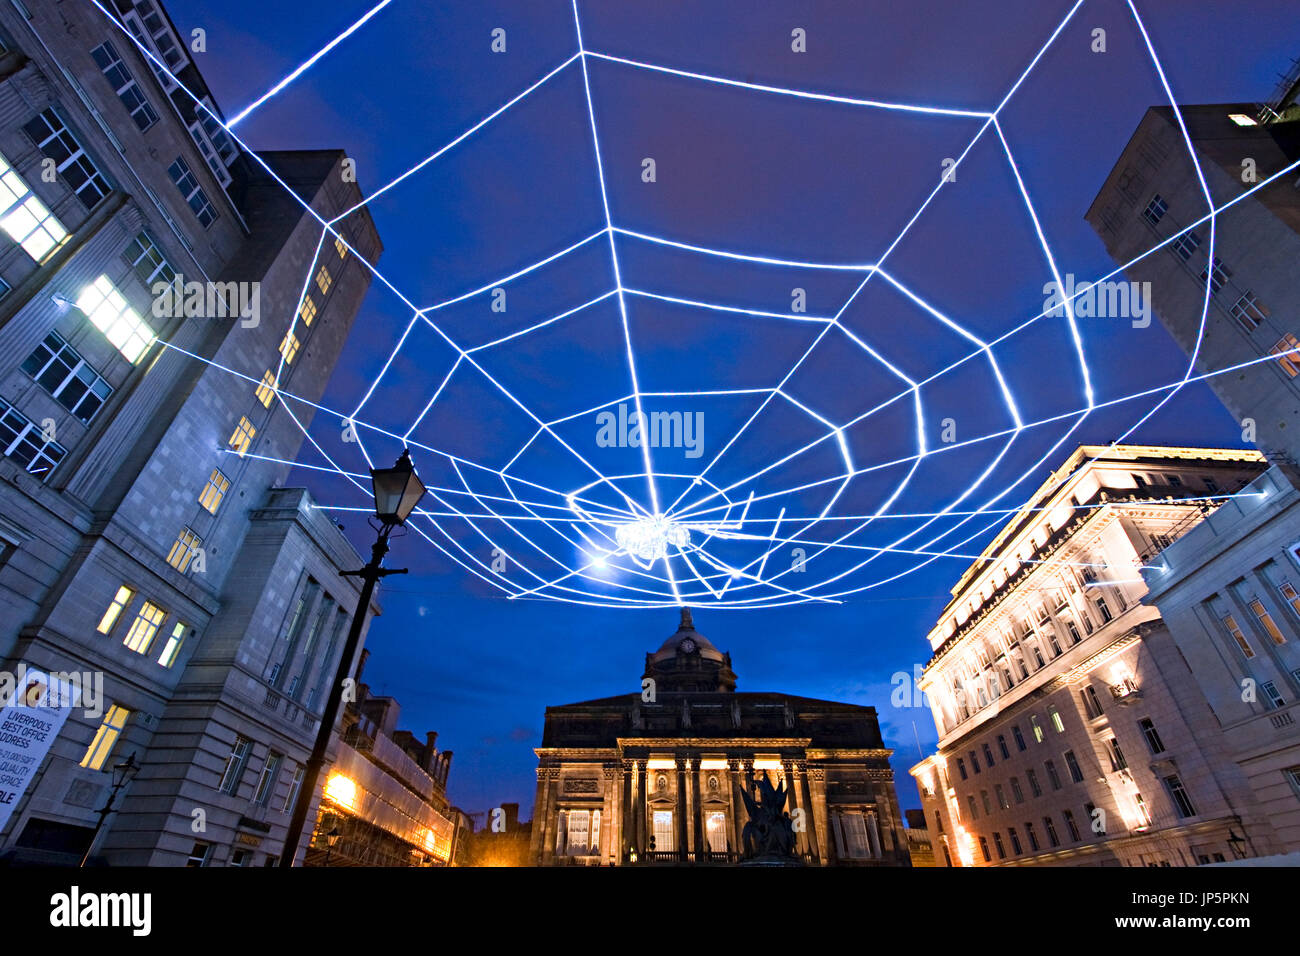 Ai Weiwei Spider lights up Exchange Flags at the rear of Liverpool Town Hall, a highlight of the Liverpool Biennial 2003. Stock Photo